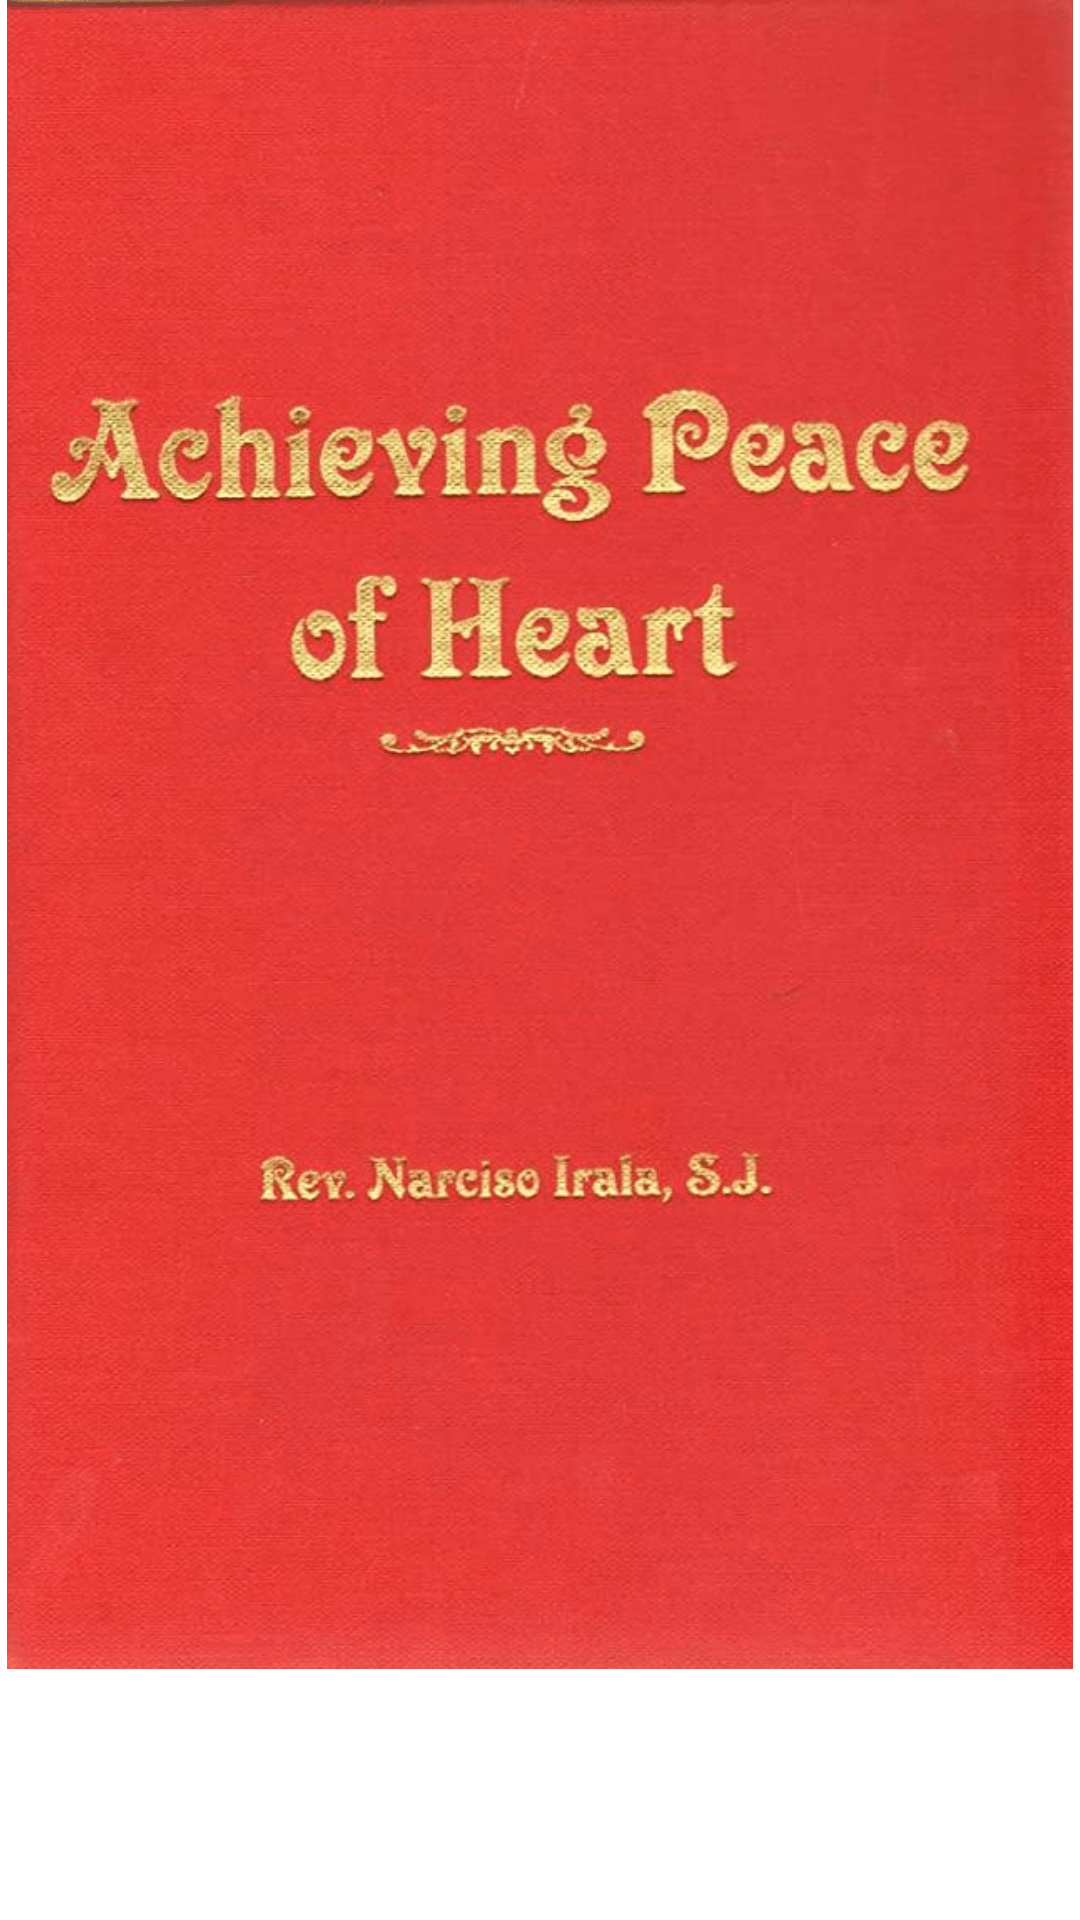 Achieving Peace of Heart by Narciso Irala